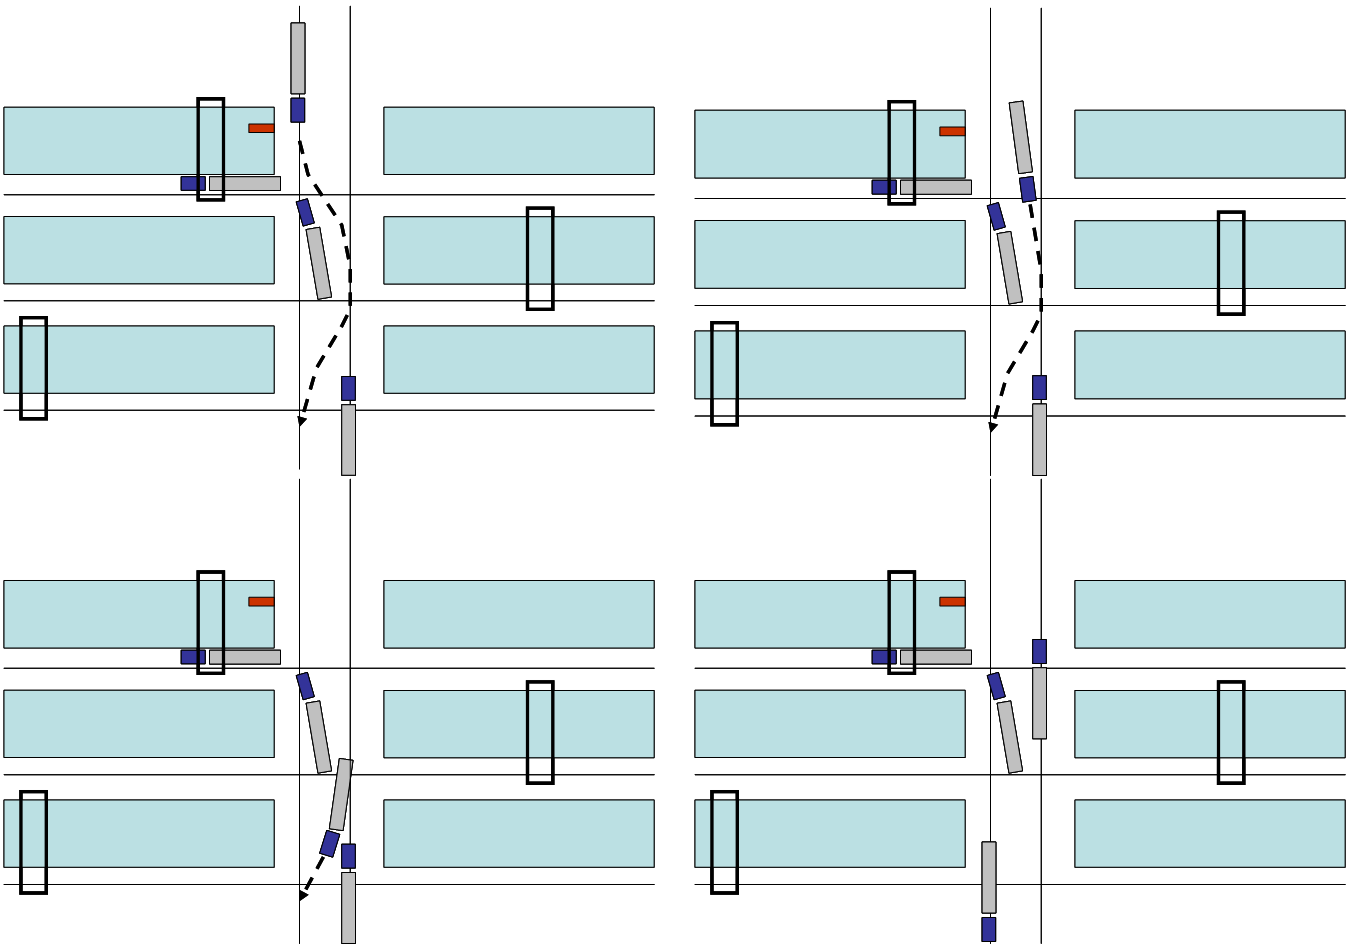 Flexible routing of driving in case of traffic that is in the way